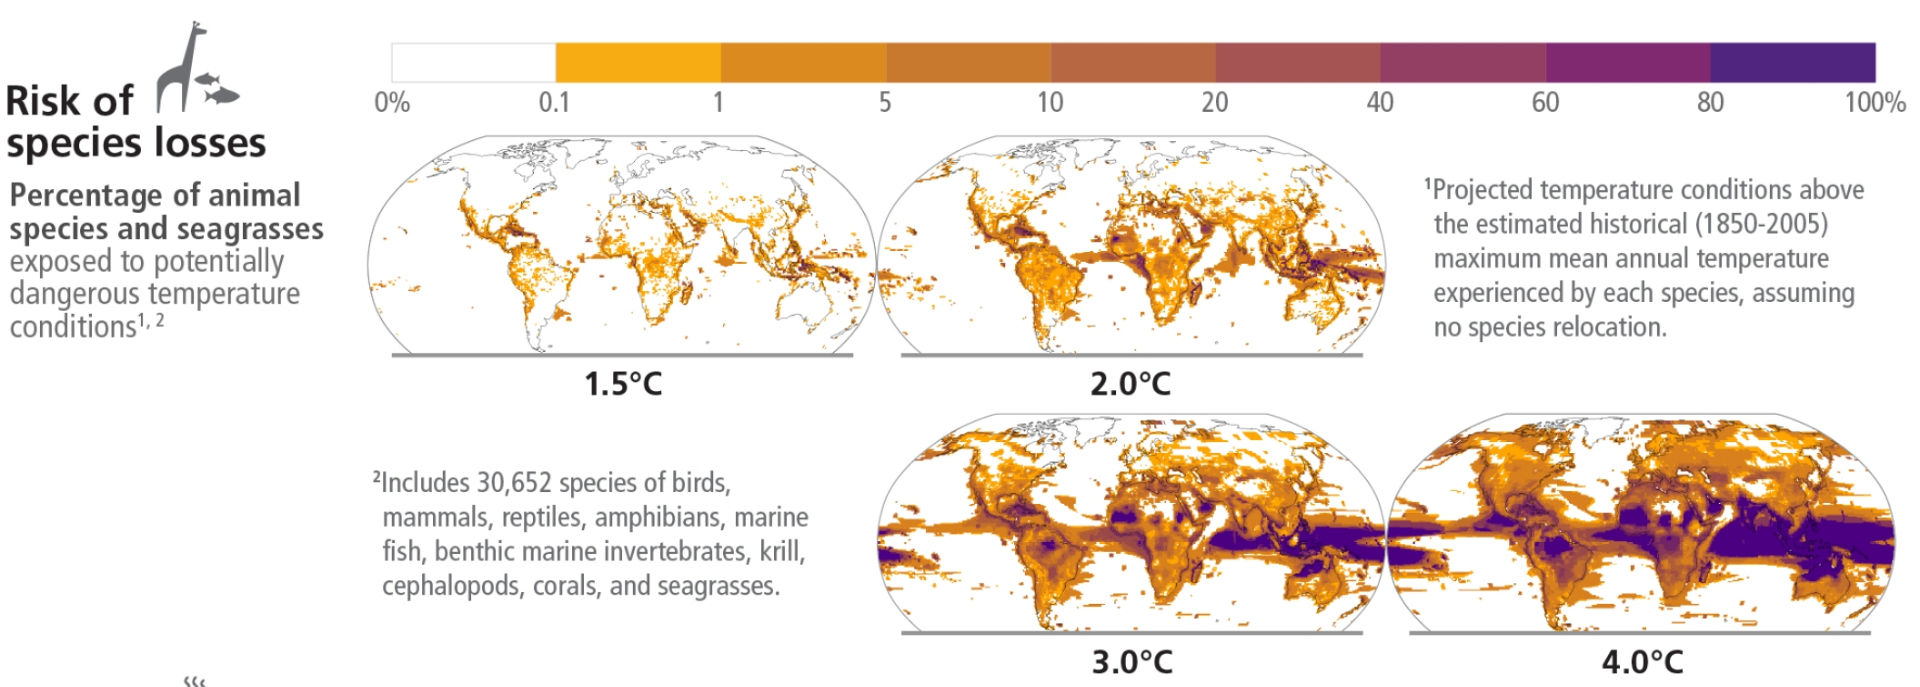 Scenarios of biodiversity loss as a result to global warming. Source: IPCC AR6 synthesis, 20 March 2023, IPCC.ch